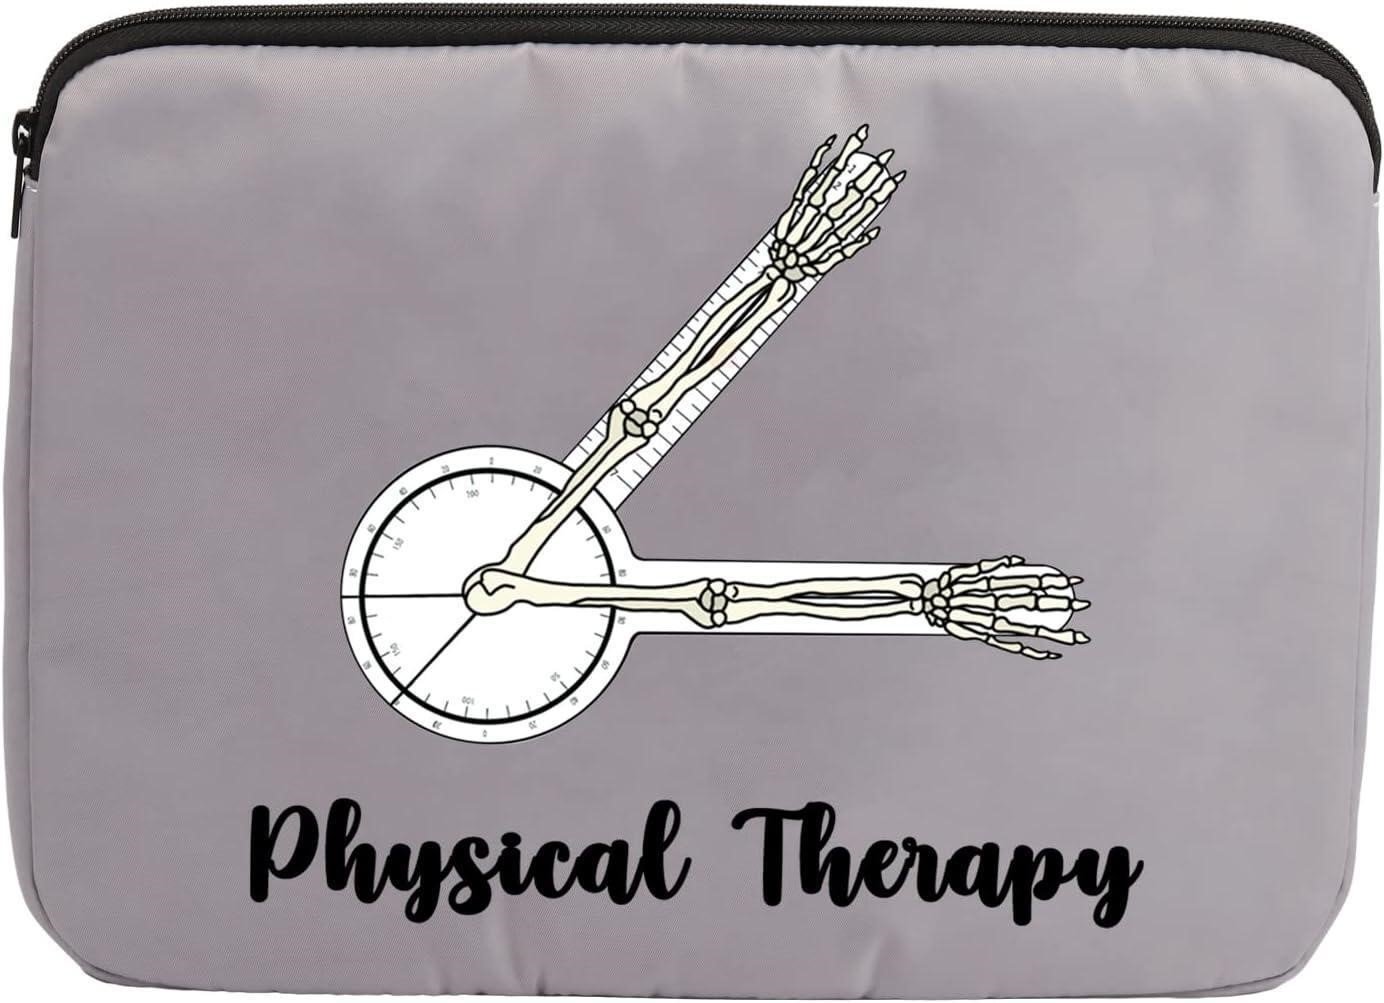 Physical Therapy Laptop Sleeve Bag